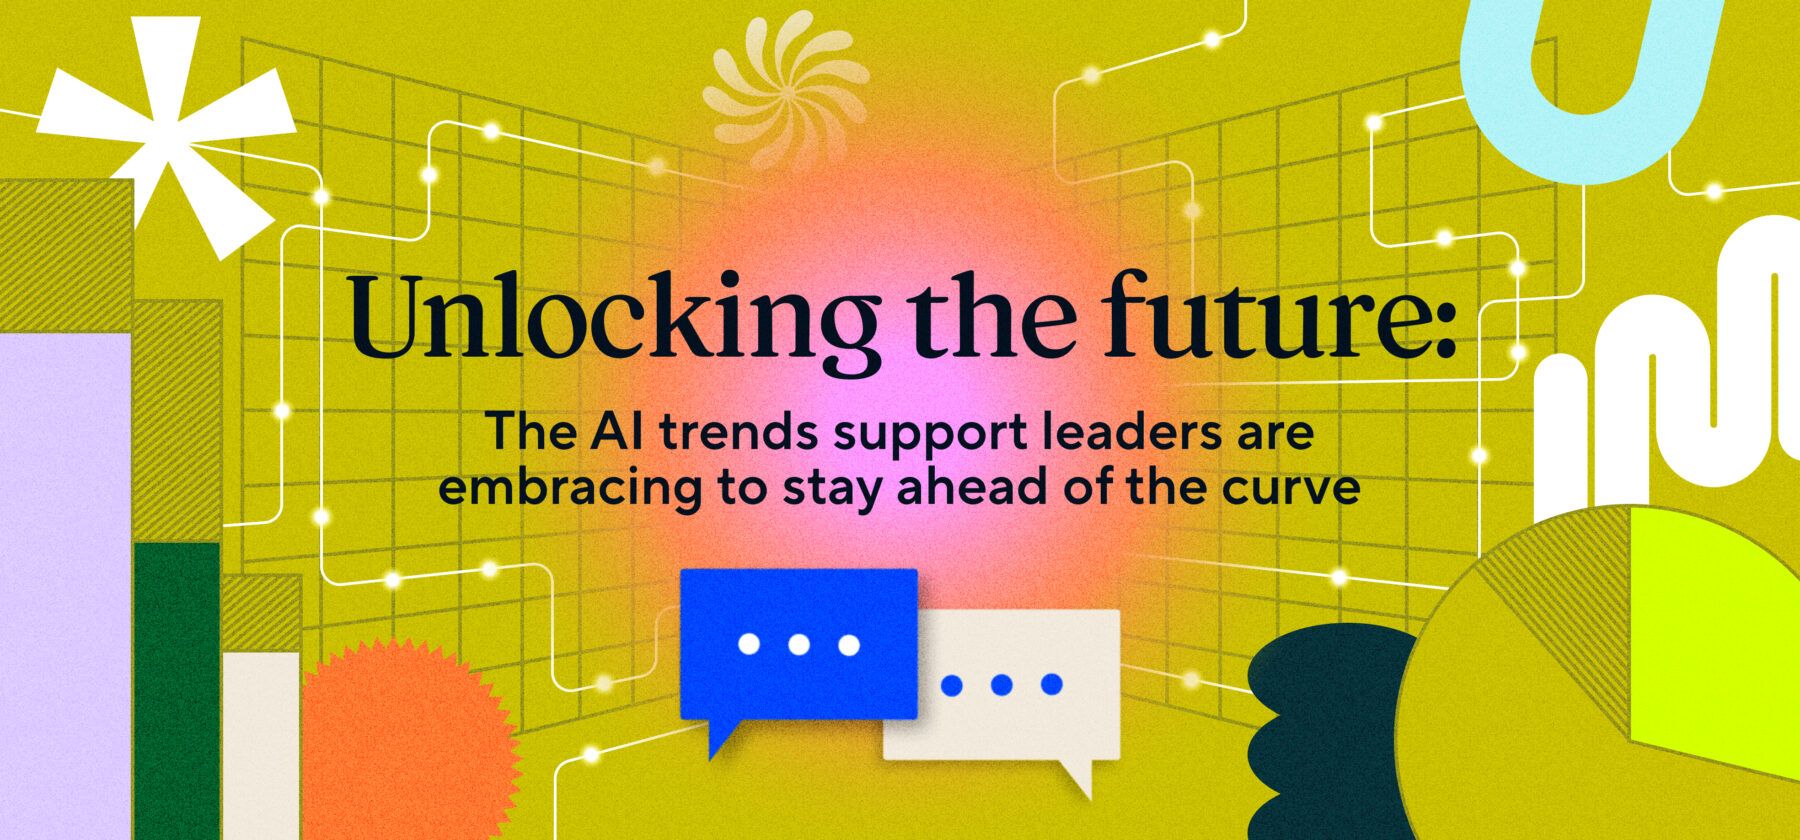 Unlocking the future: The AI trends support leaders are embracing to stay ahead of the curve